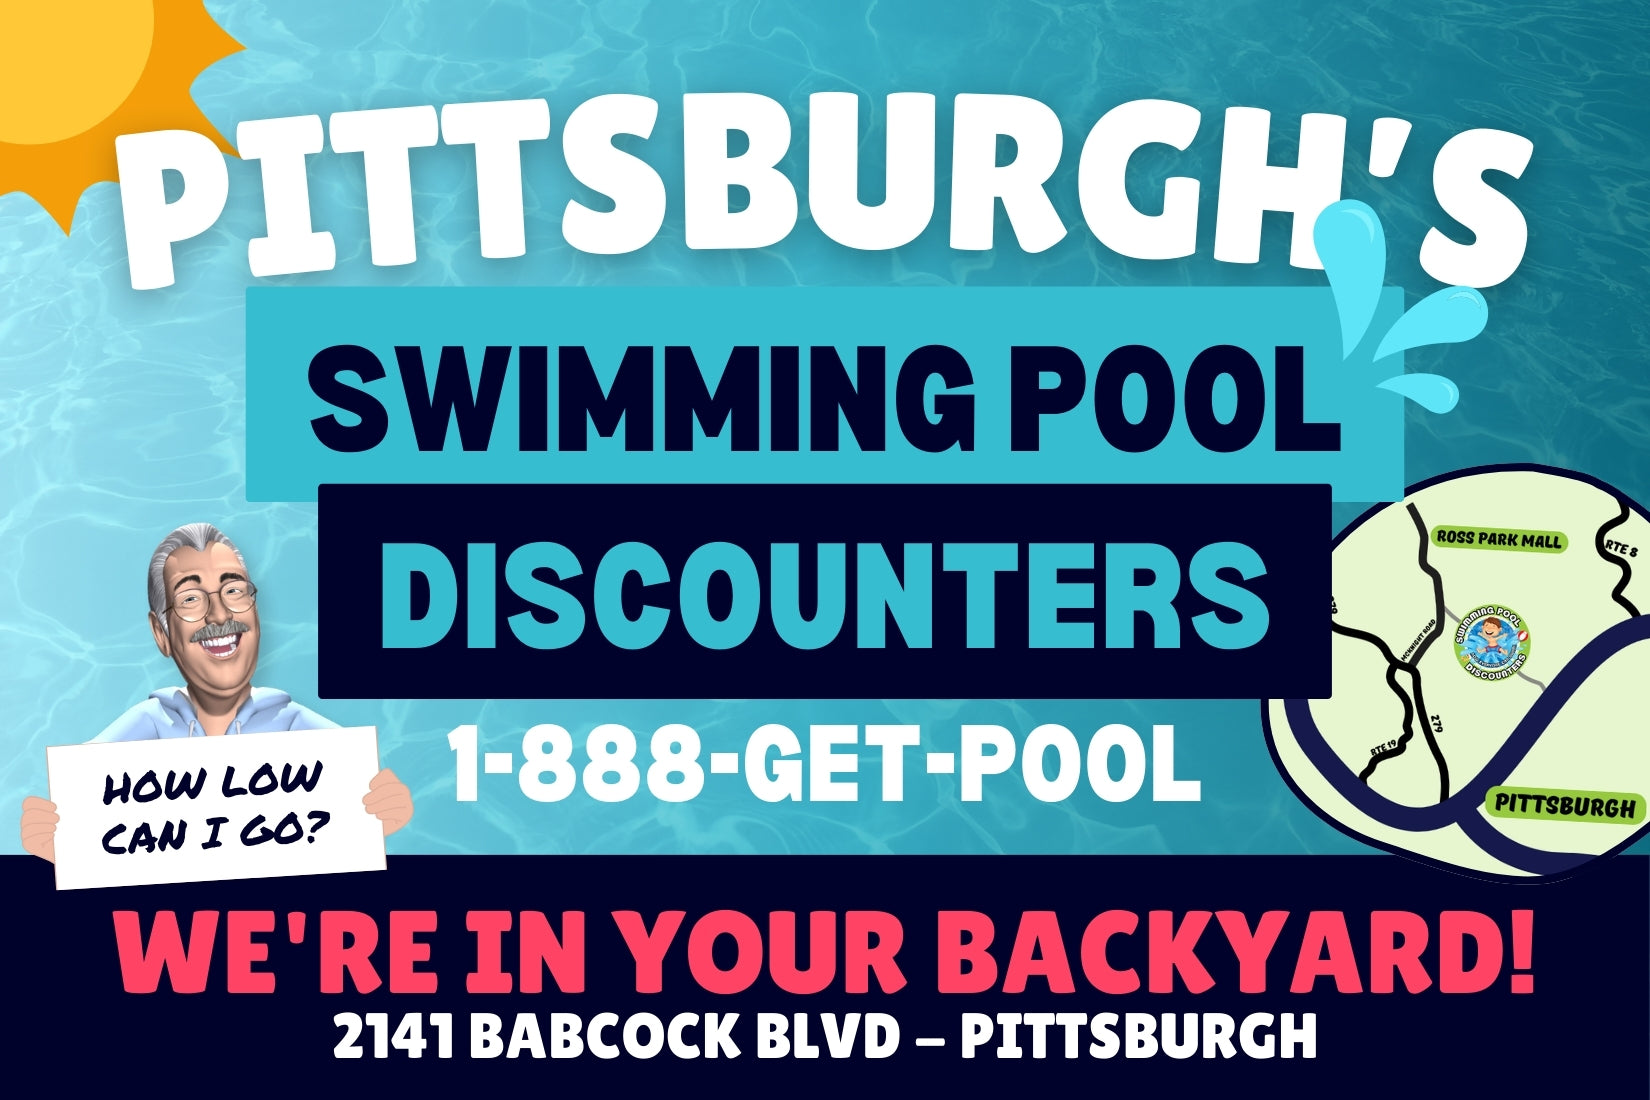 swimming pool discounters pittsburgh homepage banner